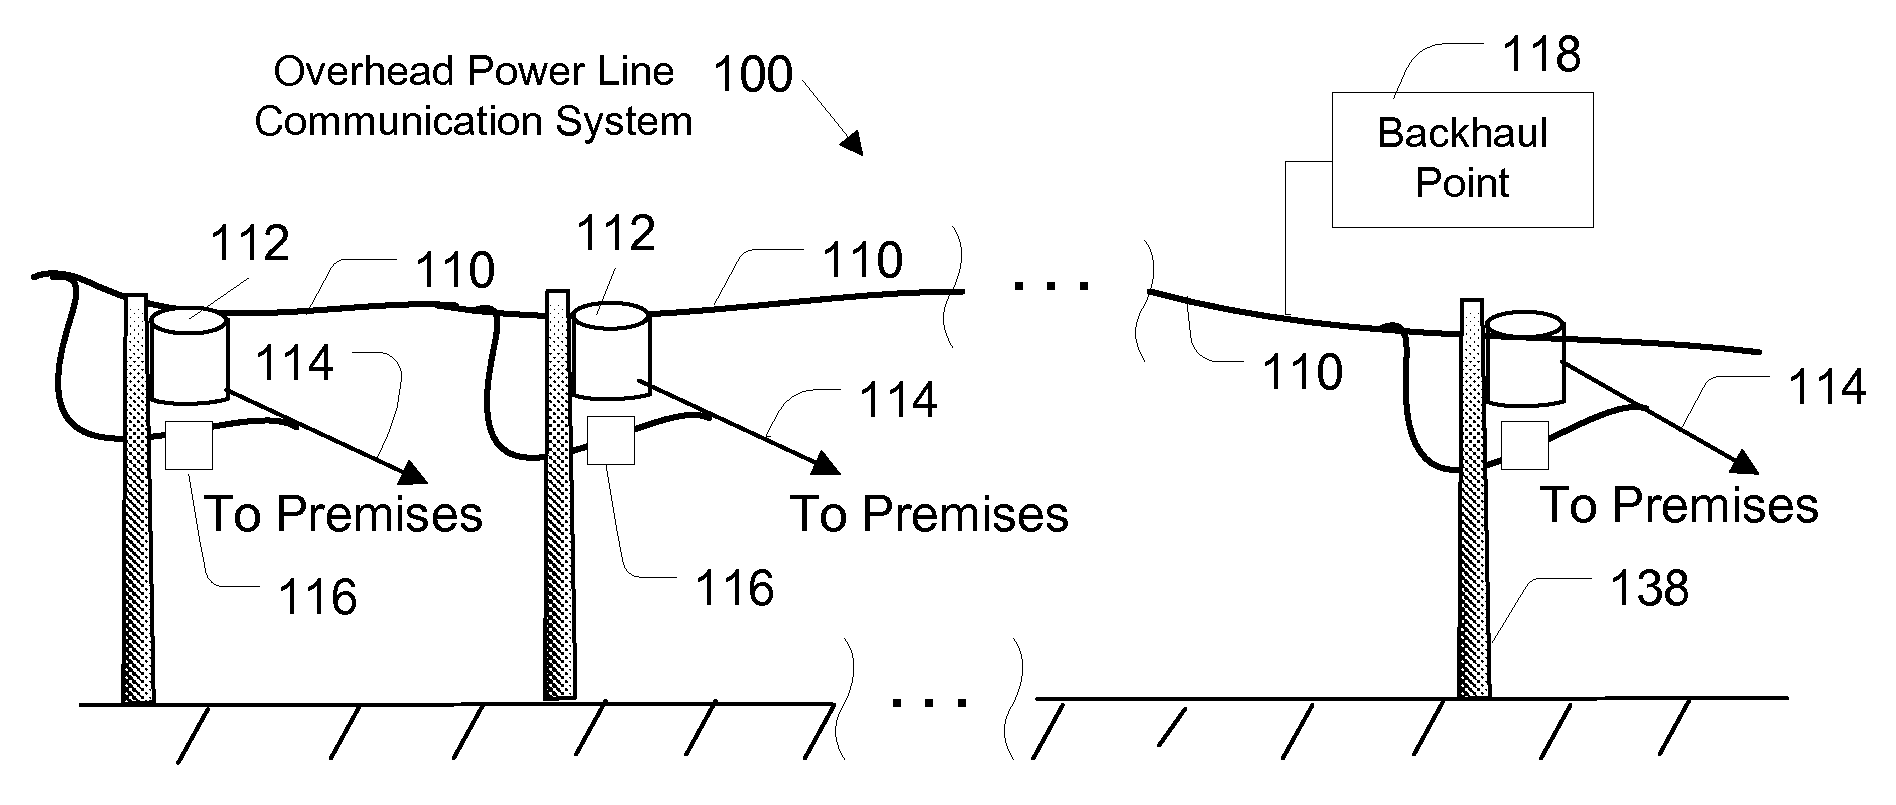 Method and Device for Providing Broadband Over Power Line Communications